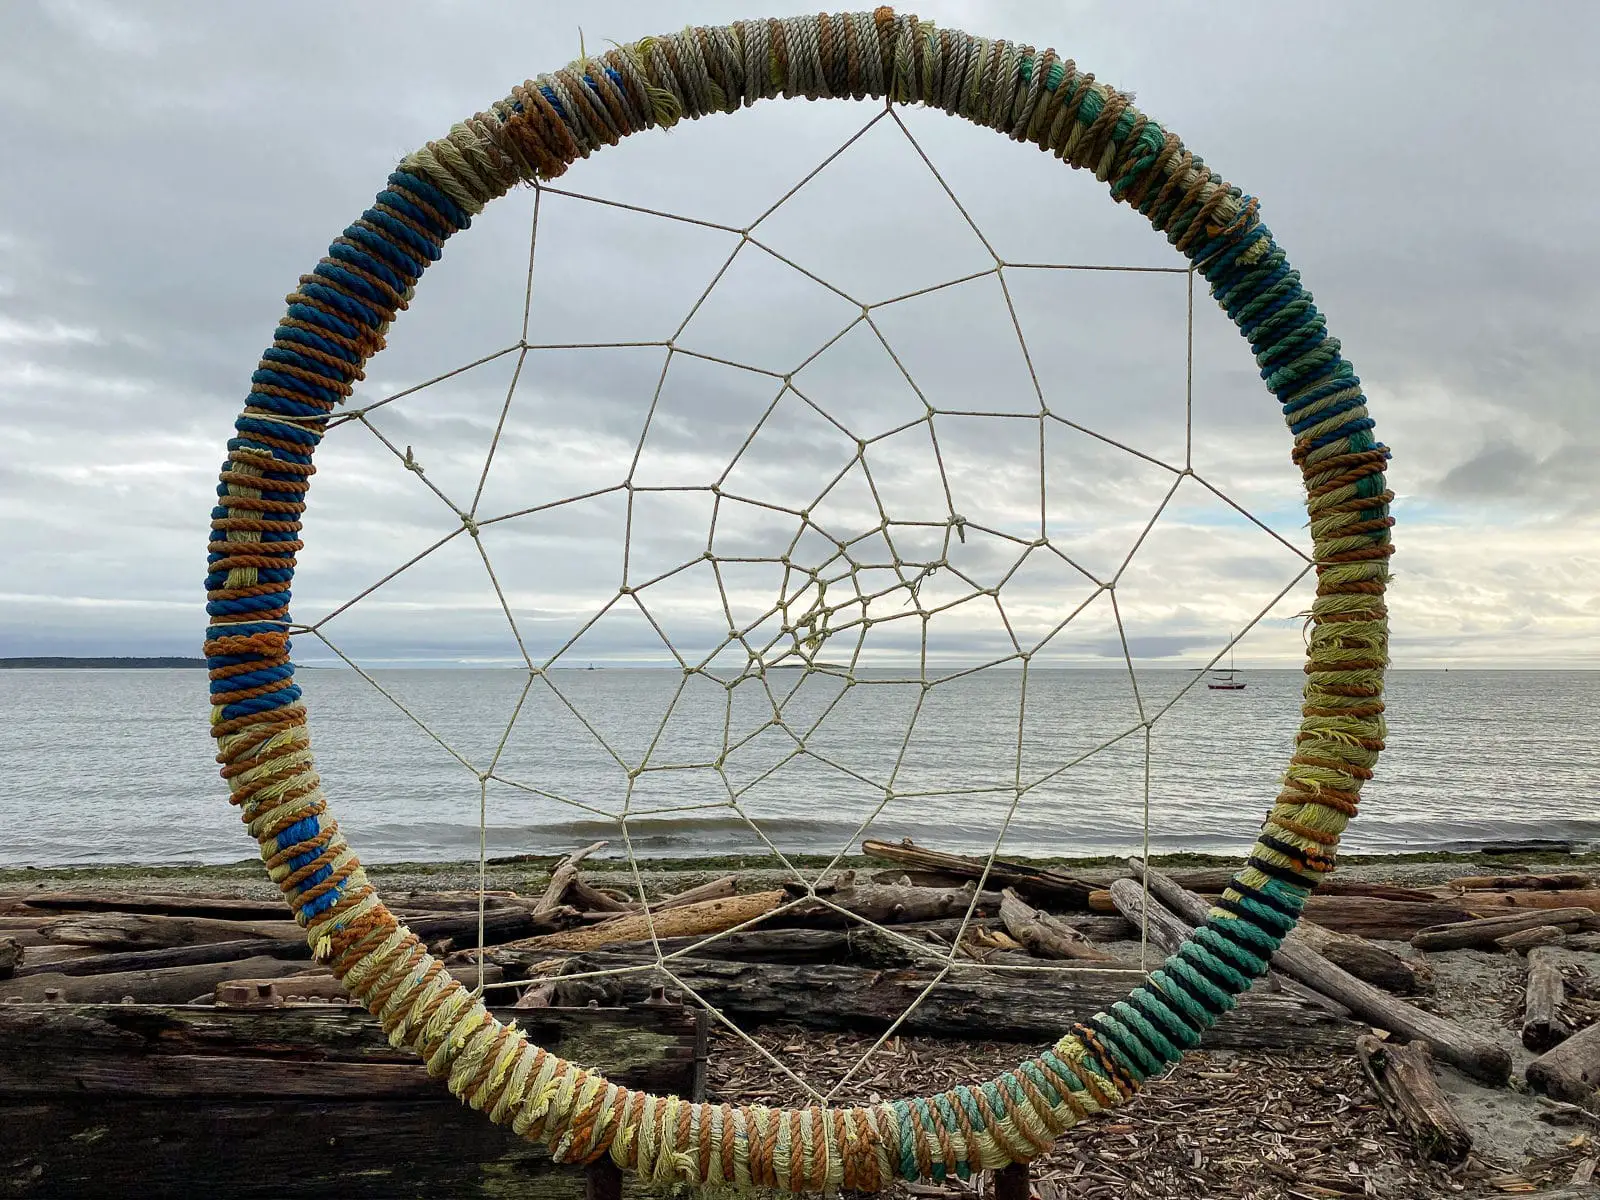 A dreamcatcher display at Willows Beach in Victoria